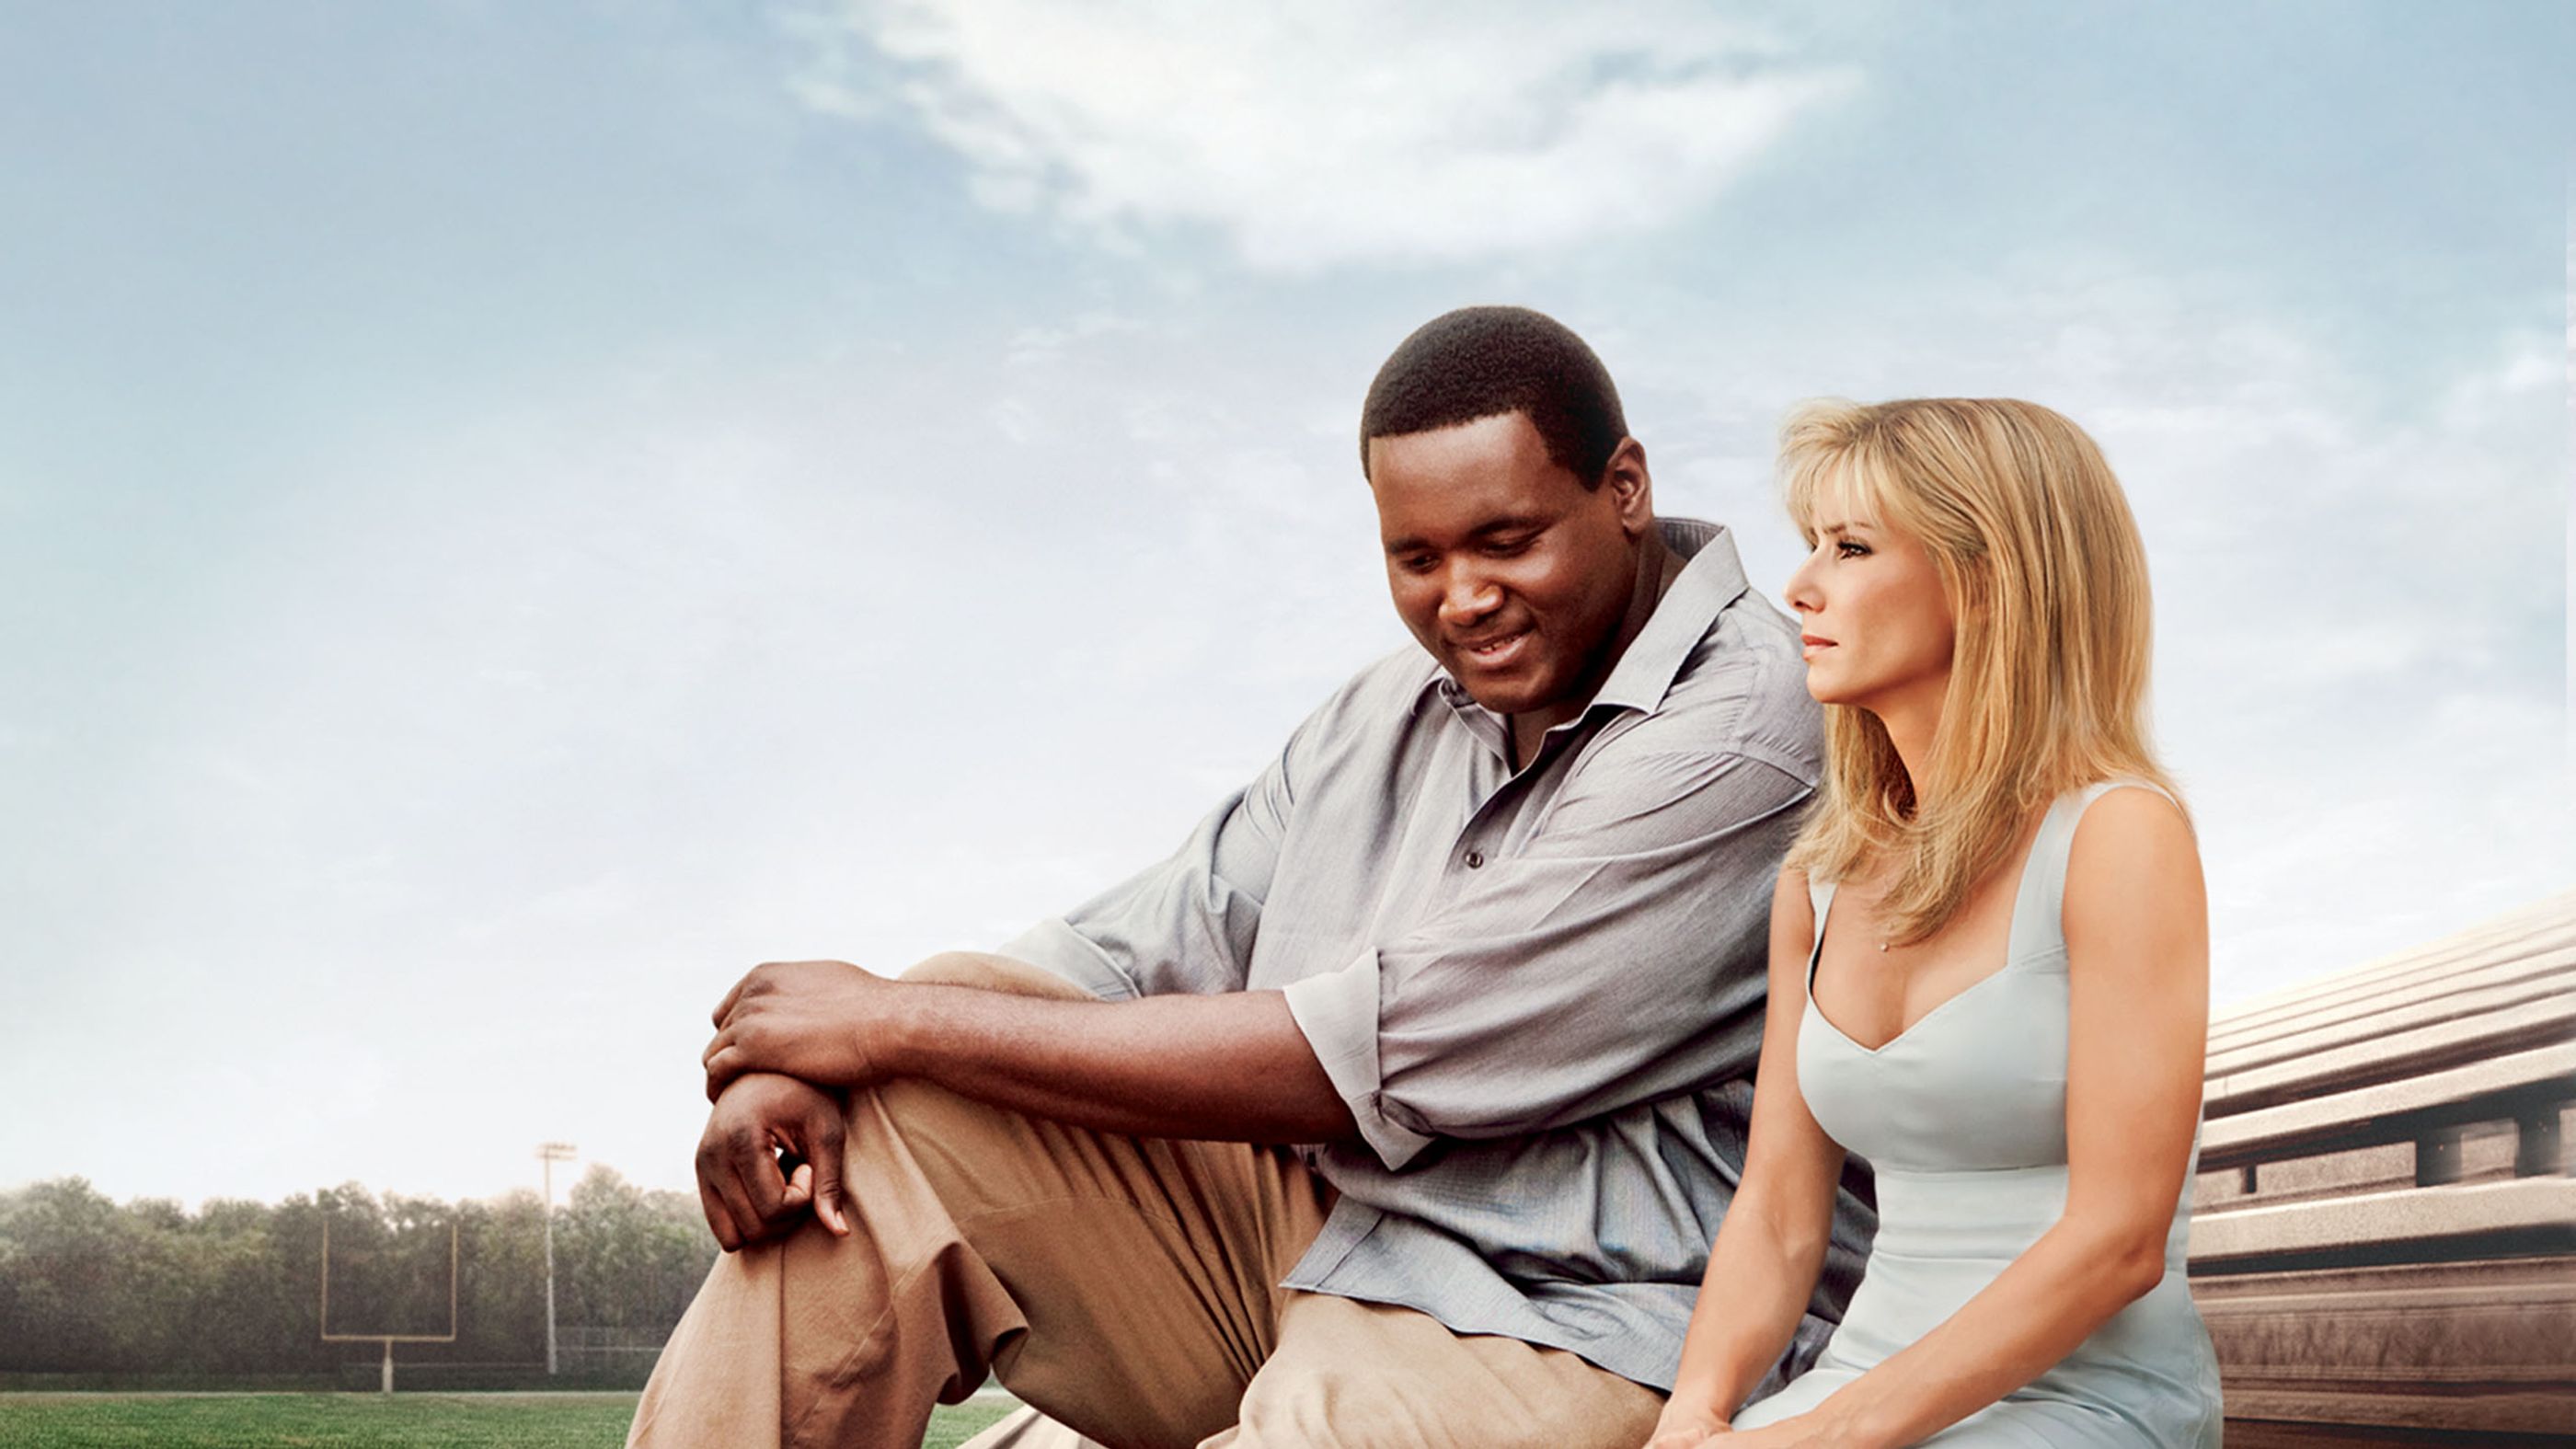 56 Top Pictures The Blind Side Full Movie Free - Watch Full Body Massage (1995) Online Full Movies FREE ...